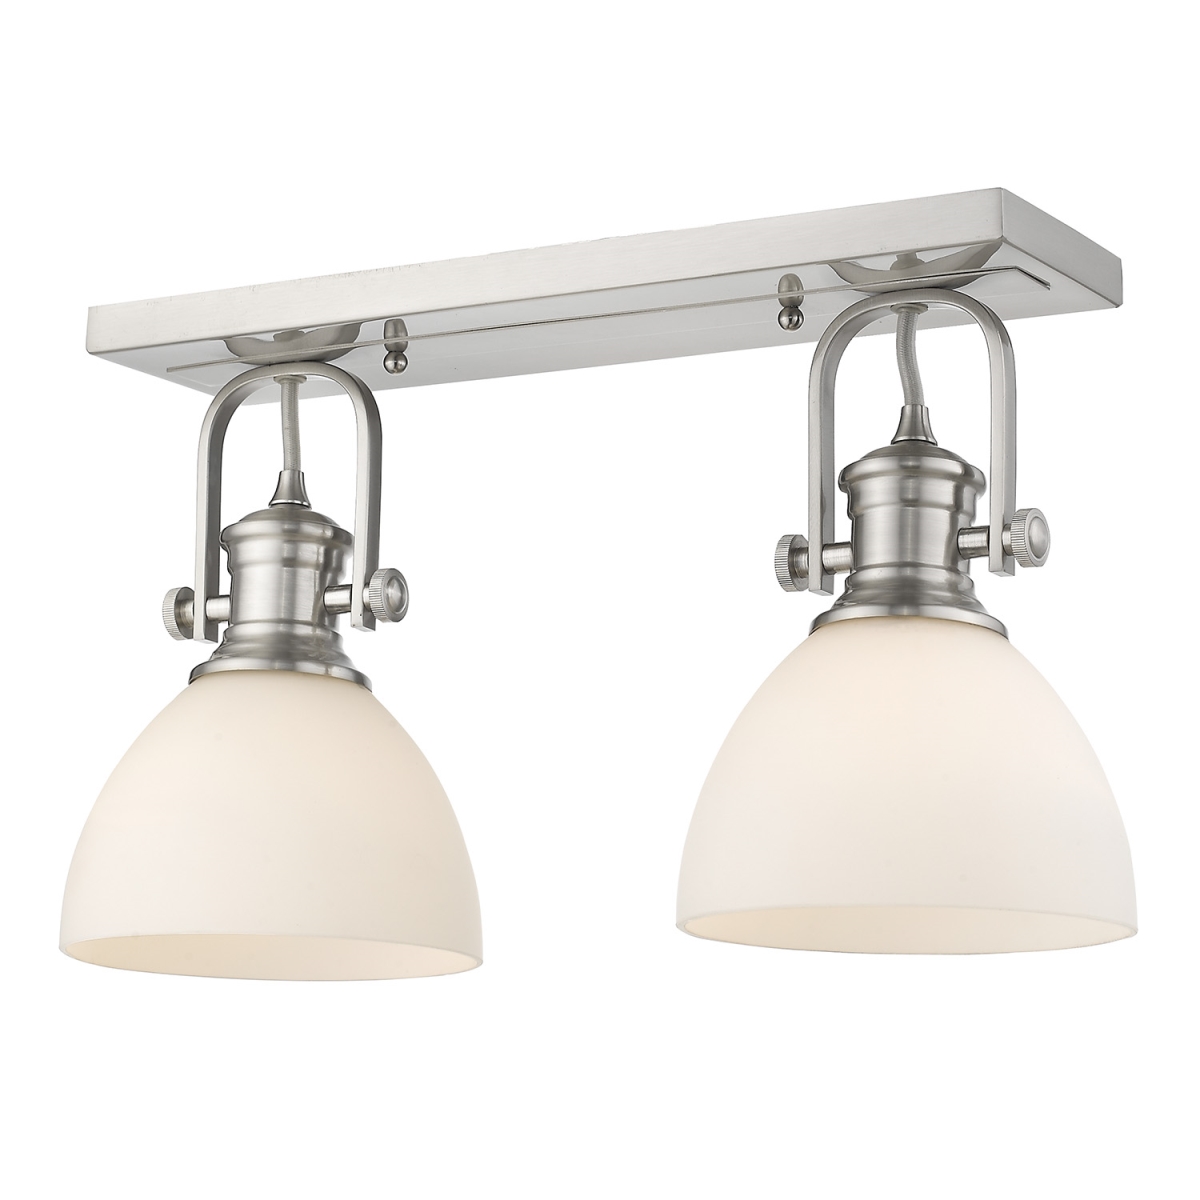 3118-2sf Pw-op Hines 2-light Semi-flush Mount With Opal Glass, Pewter